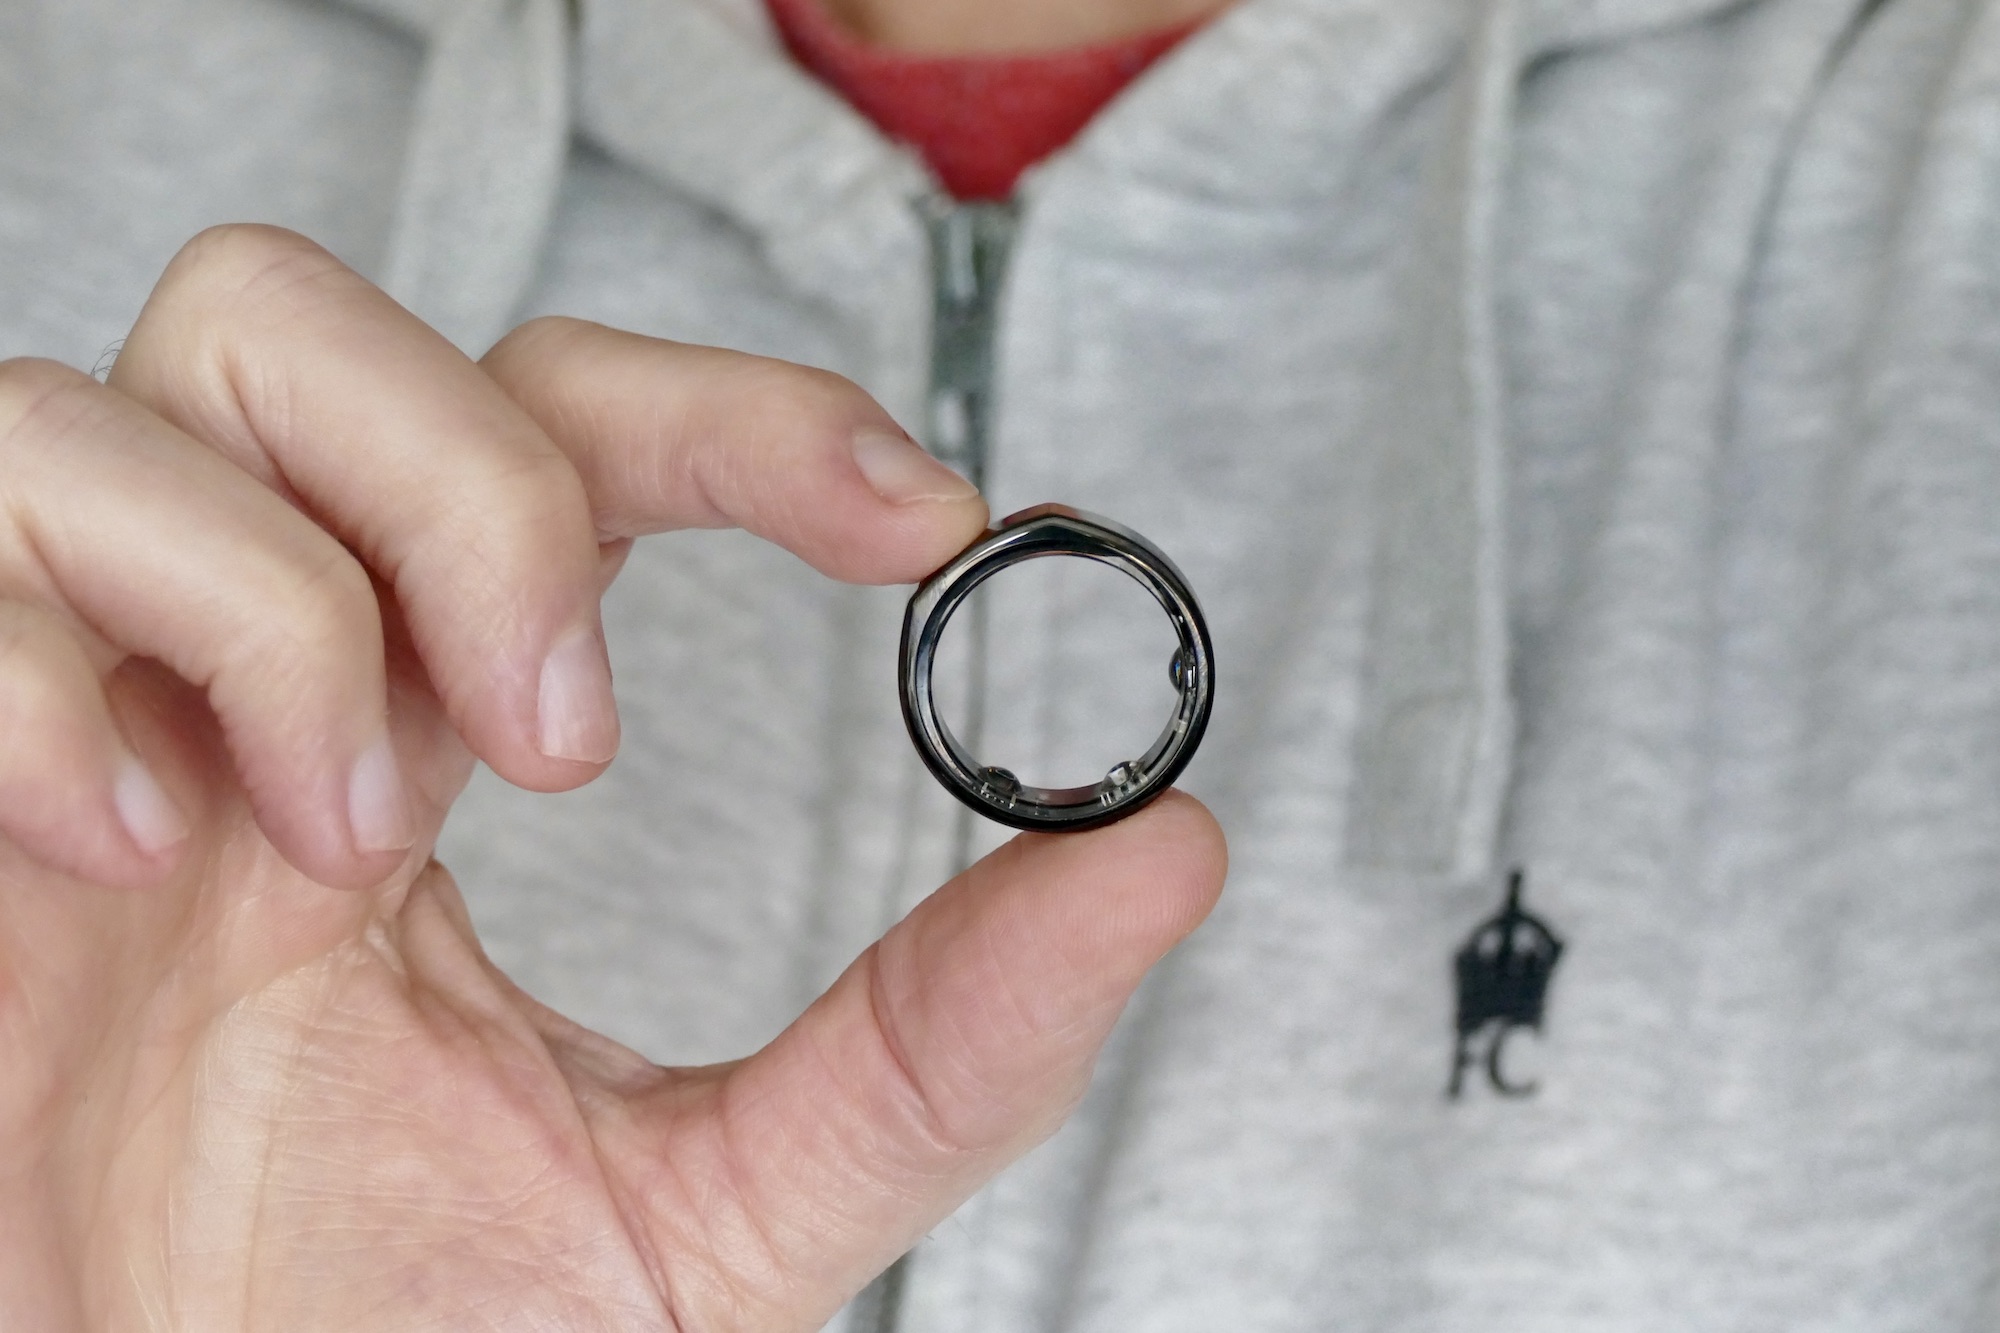 Oura Ring will get enthusiastic about health, now syncs with Strava | Virtual Developments